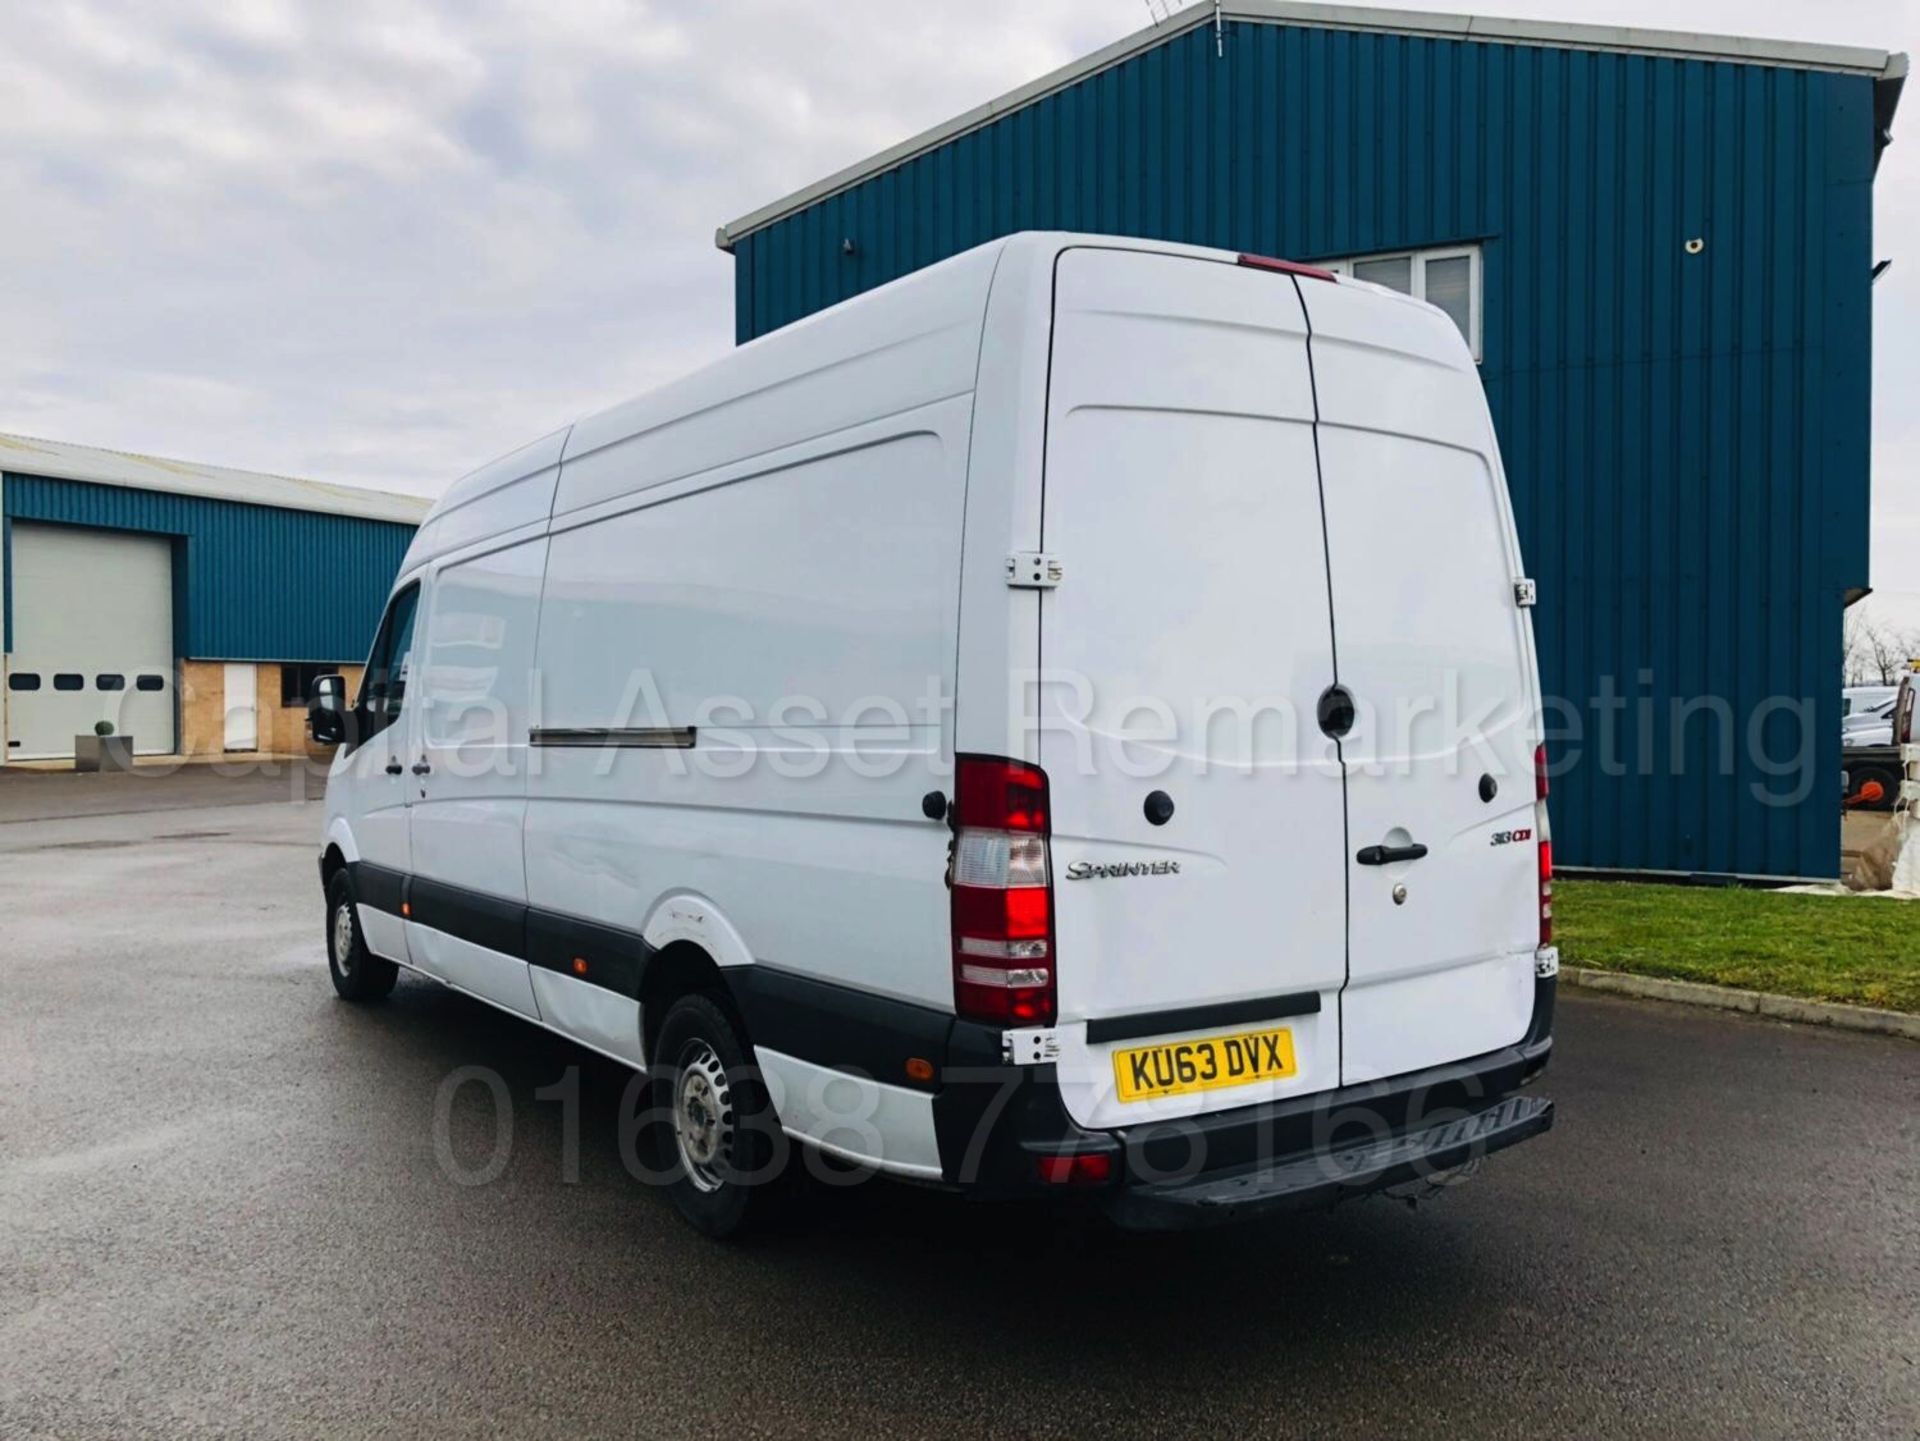 MERCEDES-BENZ SPRINTER 313 CDI *LWB HI-ROOF* (2014 MODEL) '130 BHP - 6 SPEED' (1 OWNER FROM NEW) - Image 10 of 32